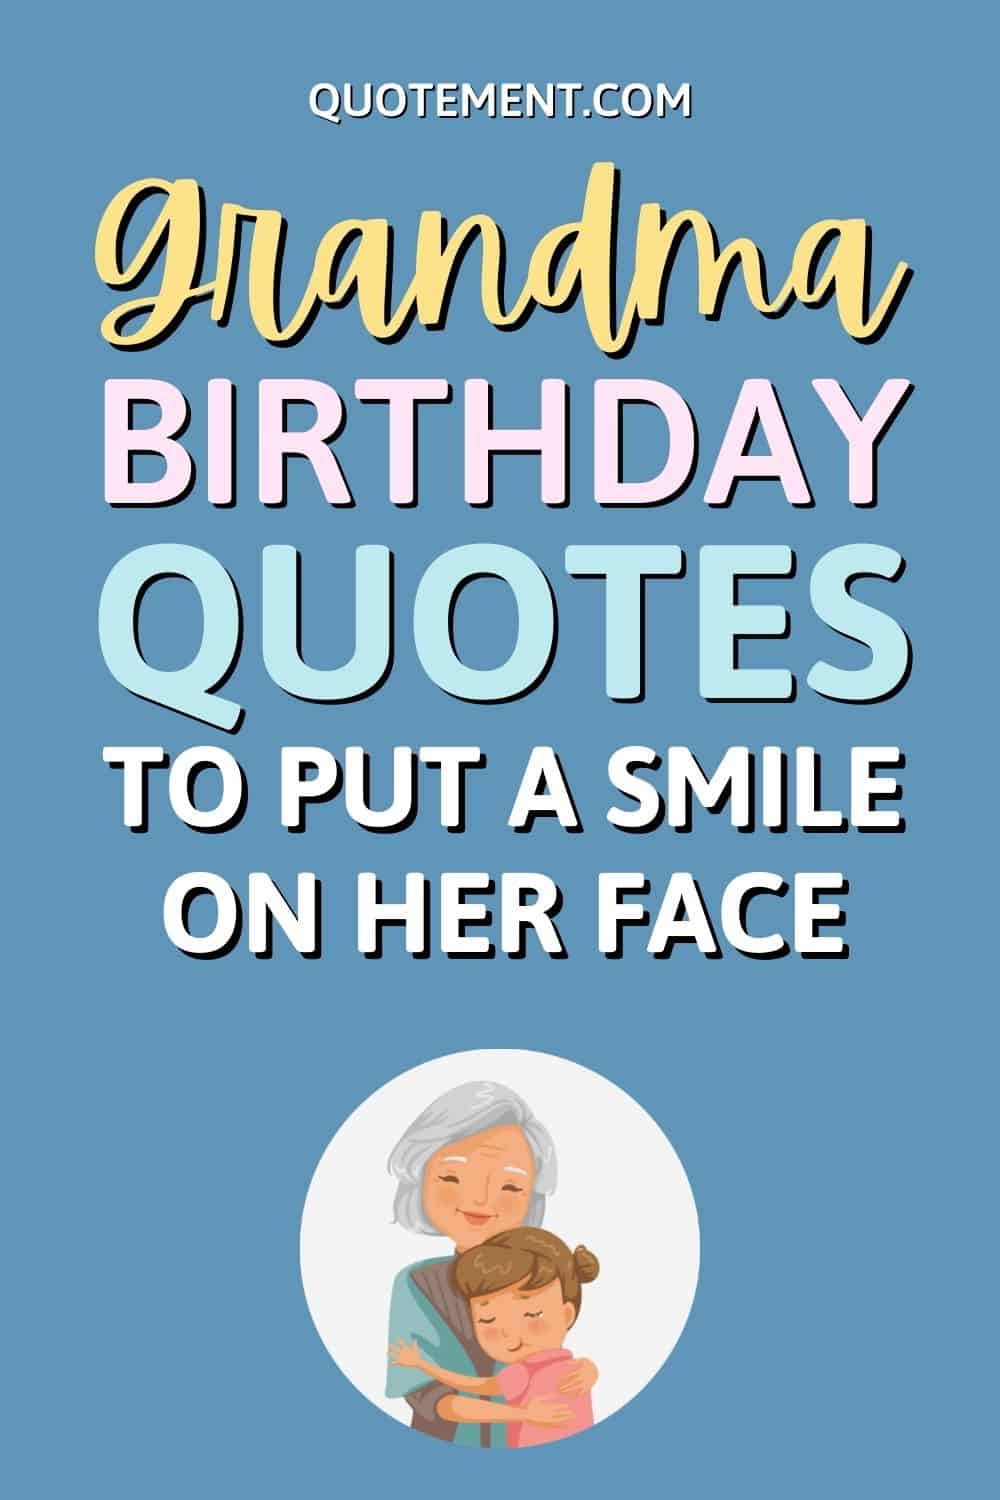 100 Grandma Birthday Quotes To Make Her Day Memorable 